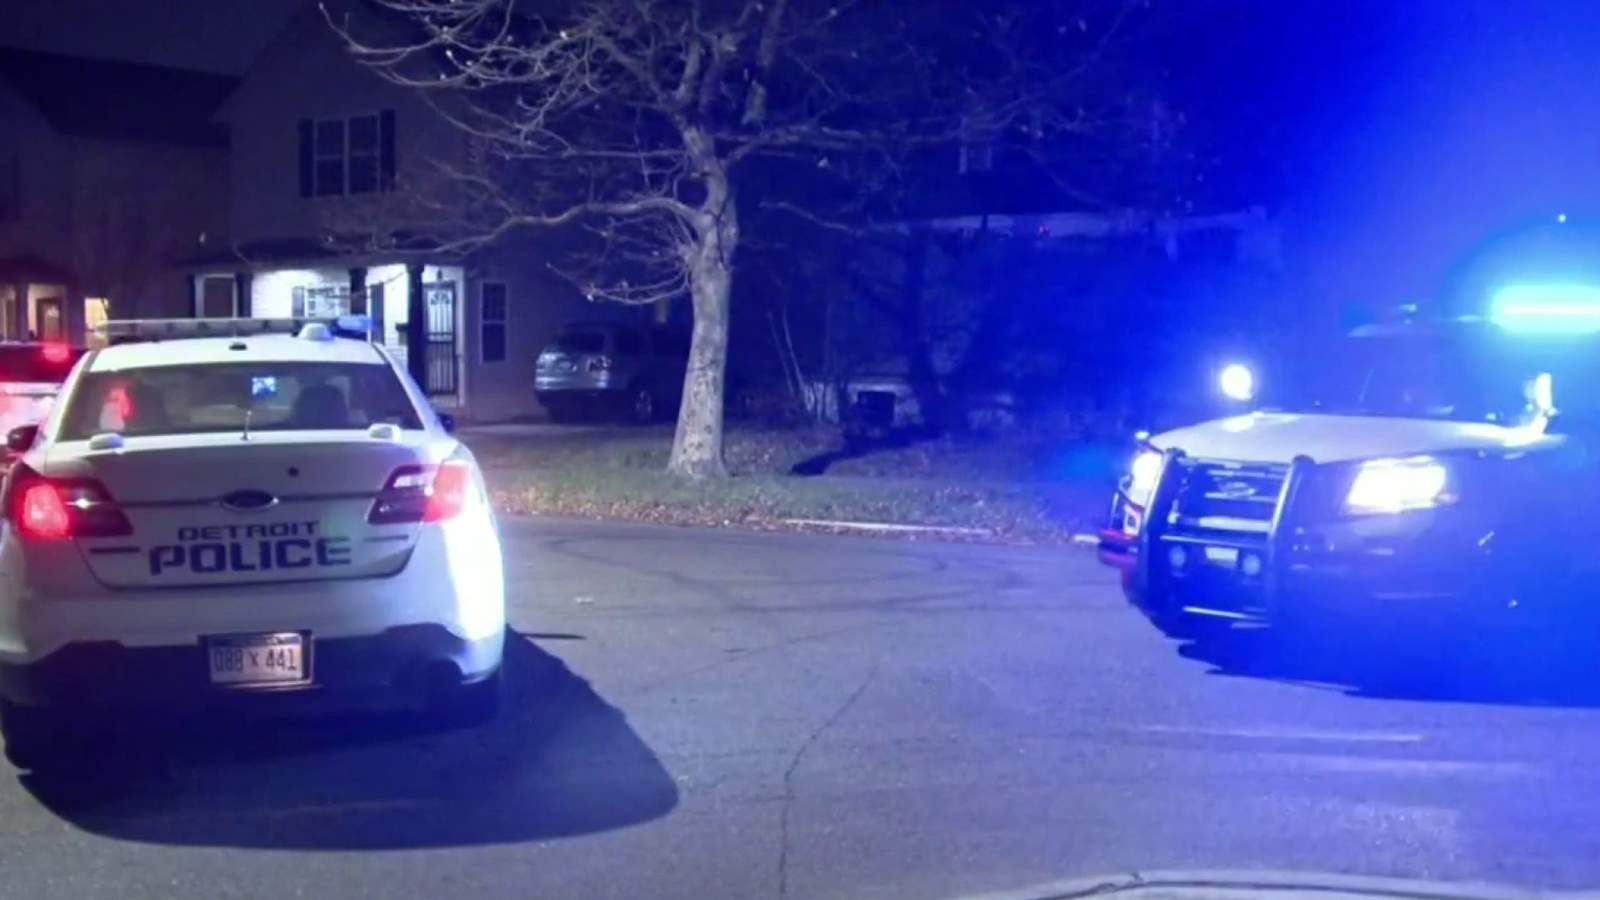 14-year-old injured in shooting on Detroit’s east side